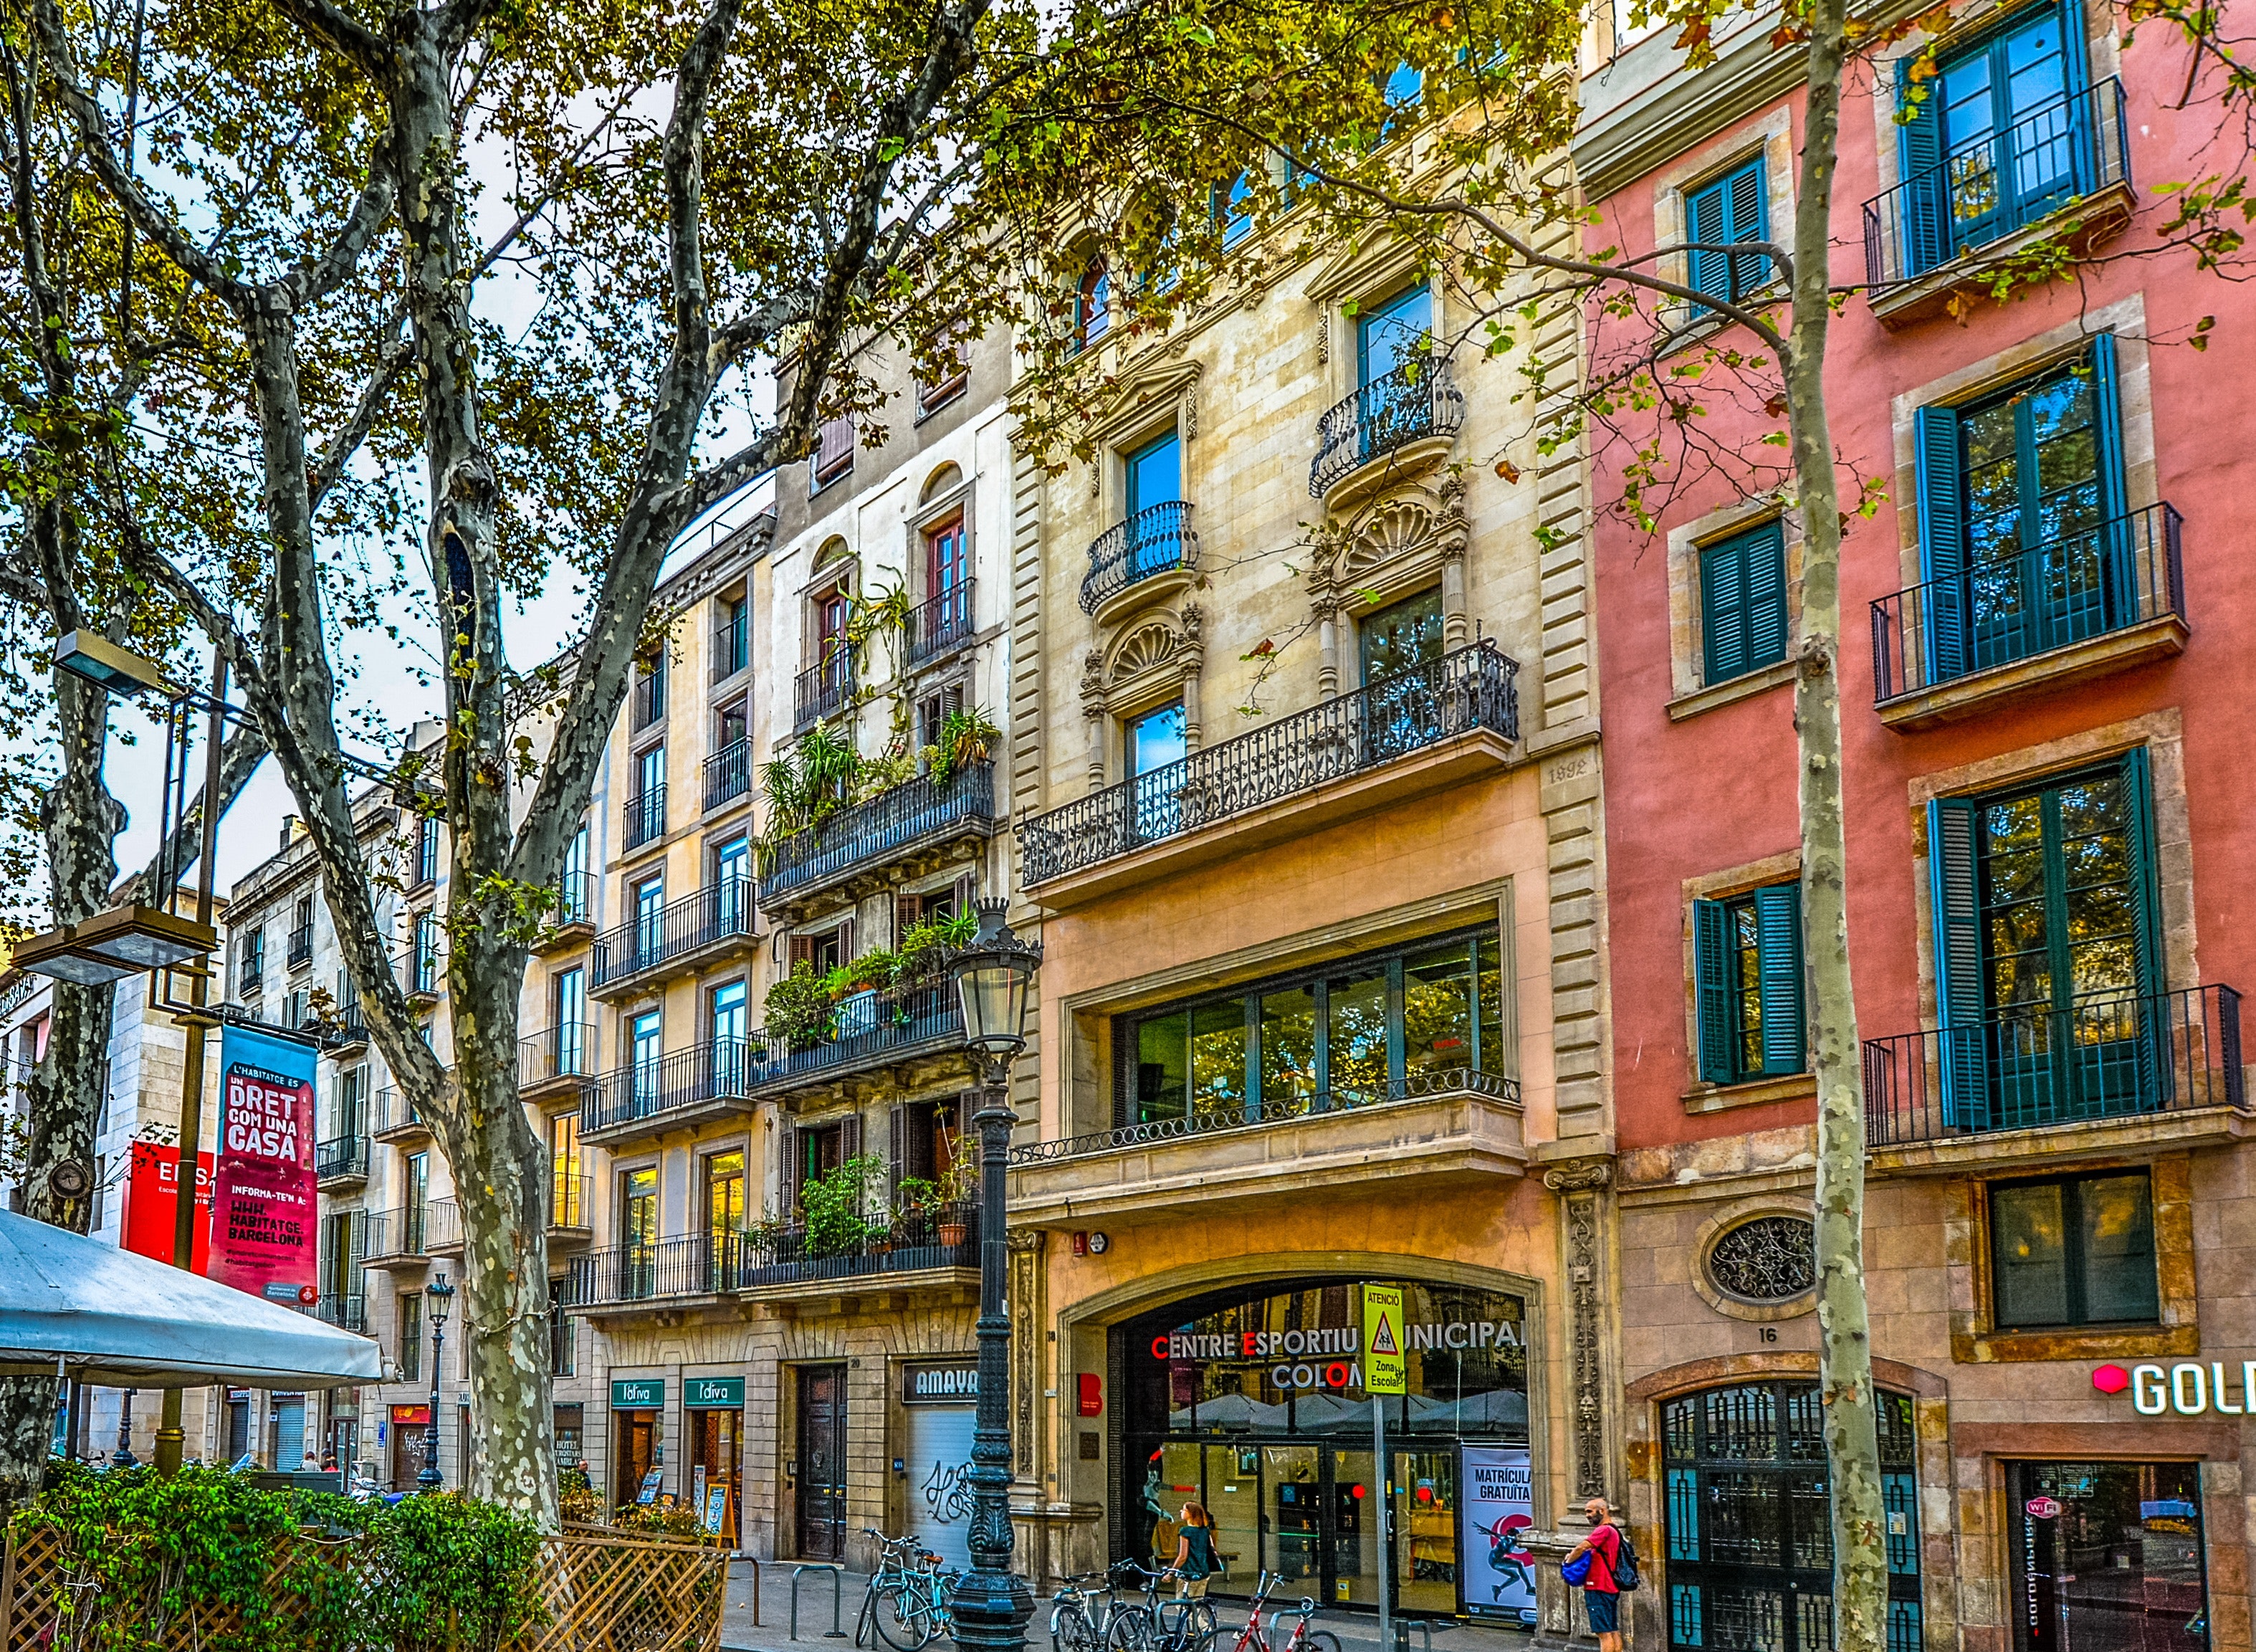 Flight Deal: Travel To Barcelona For As Low As $287 Round-Trip